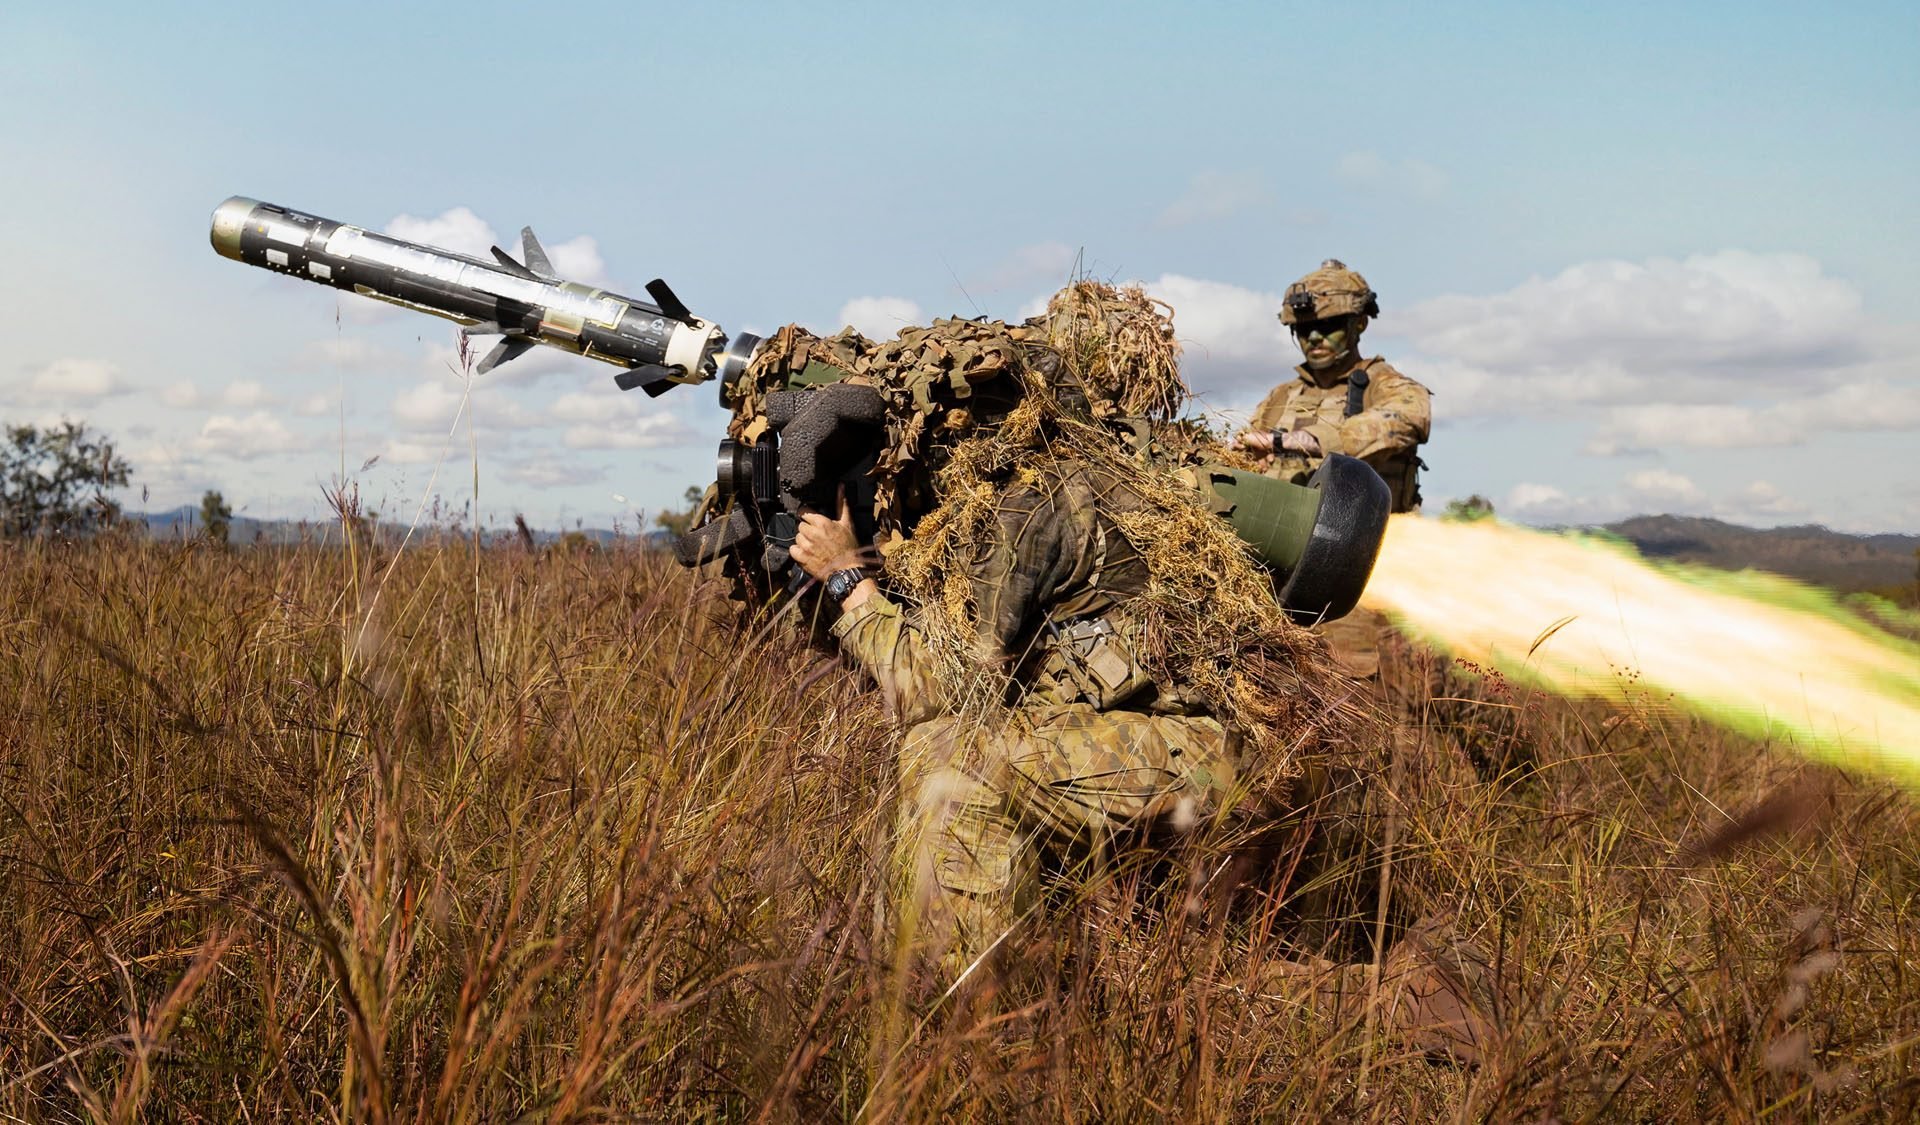 Lockheed Martin and Raytheon awarded Javelin production contract potentially worth $7.2bn to US and foreign customers